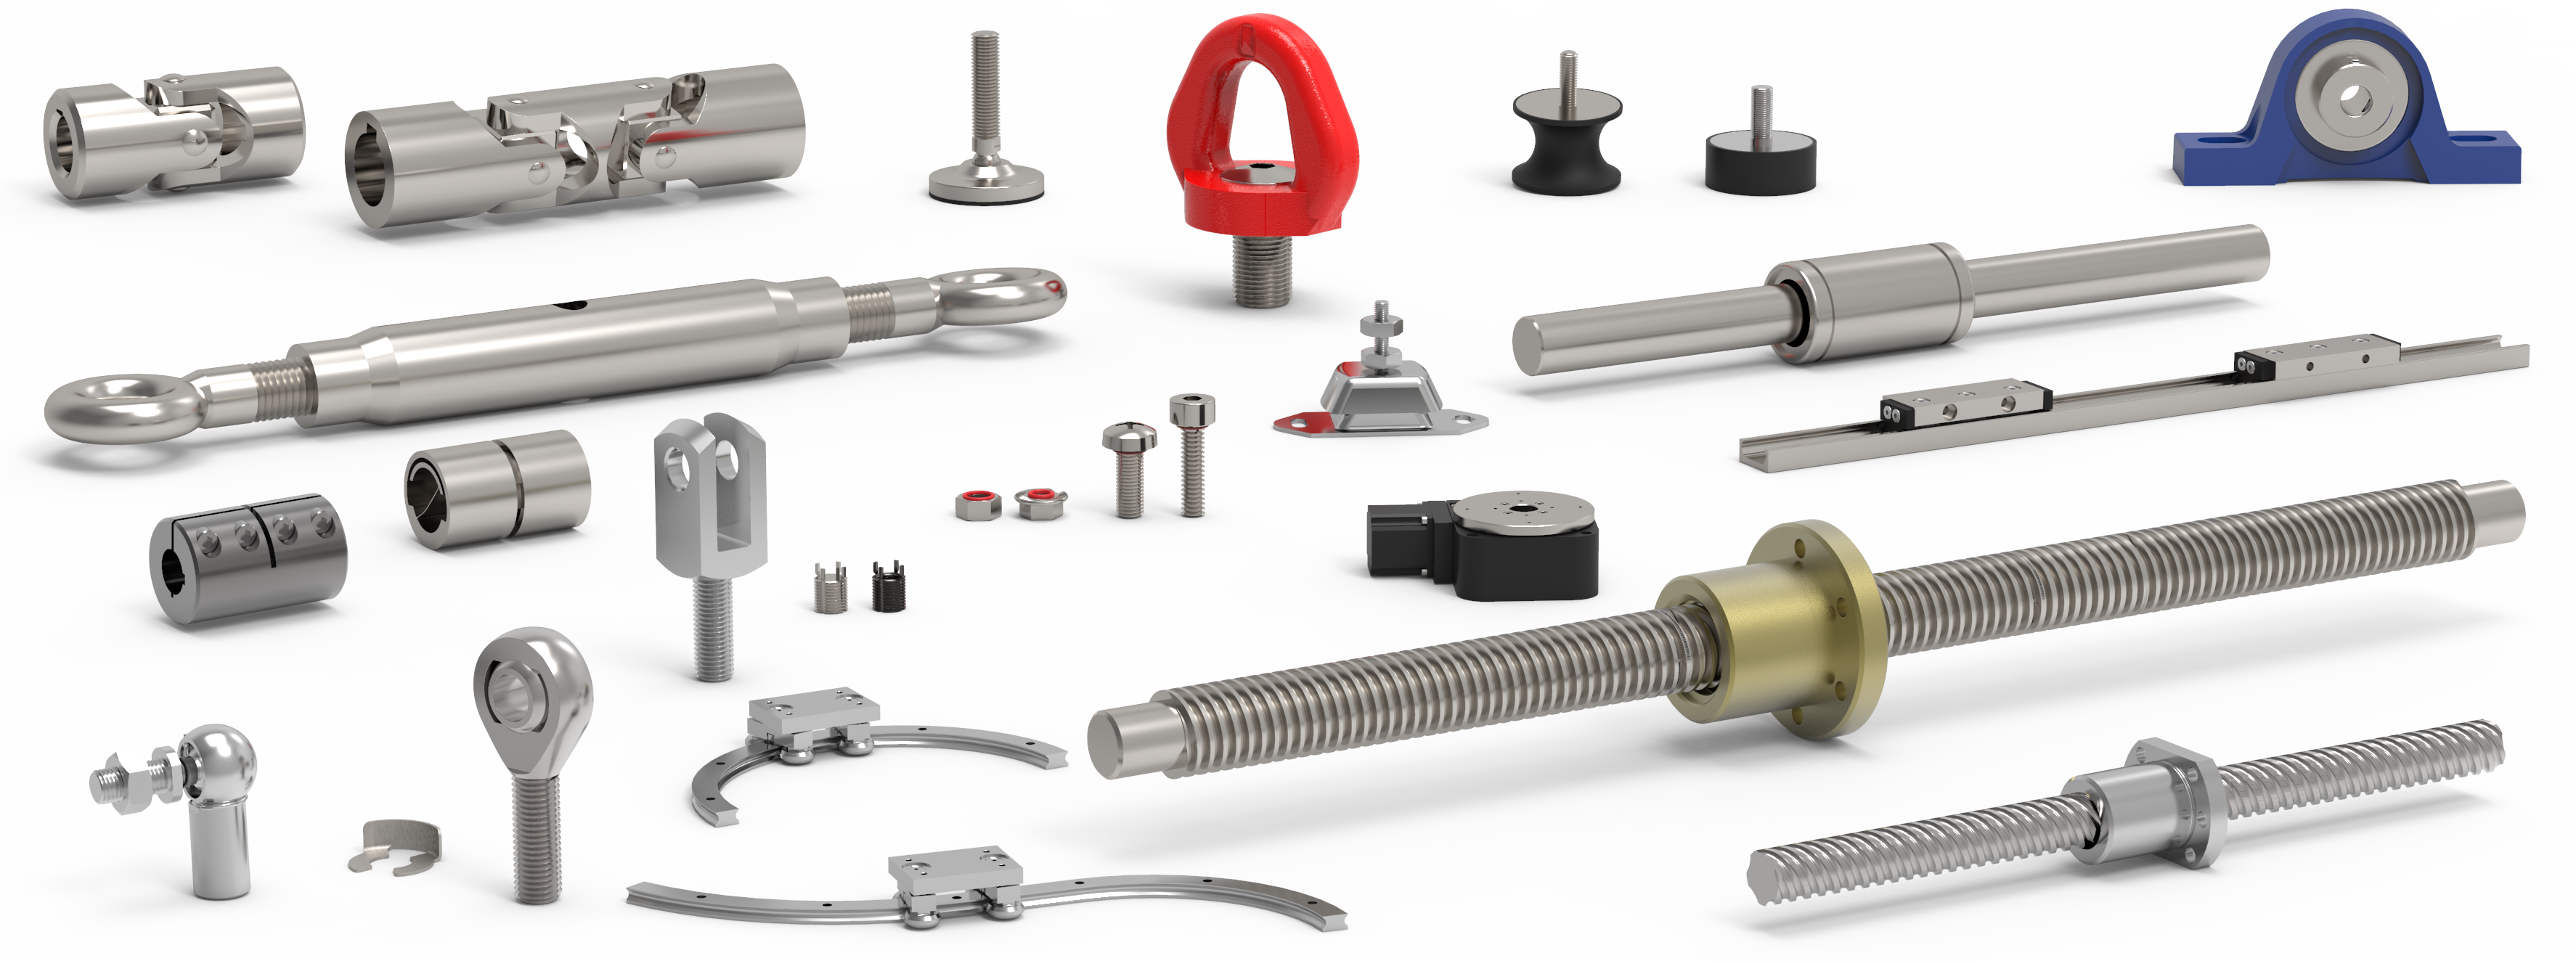 Lead Screw Accessories From Automotion